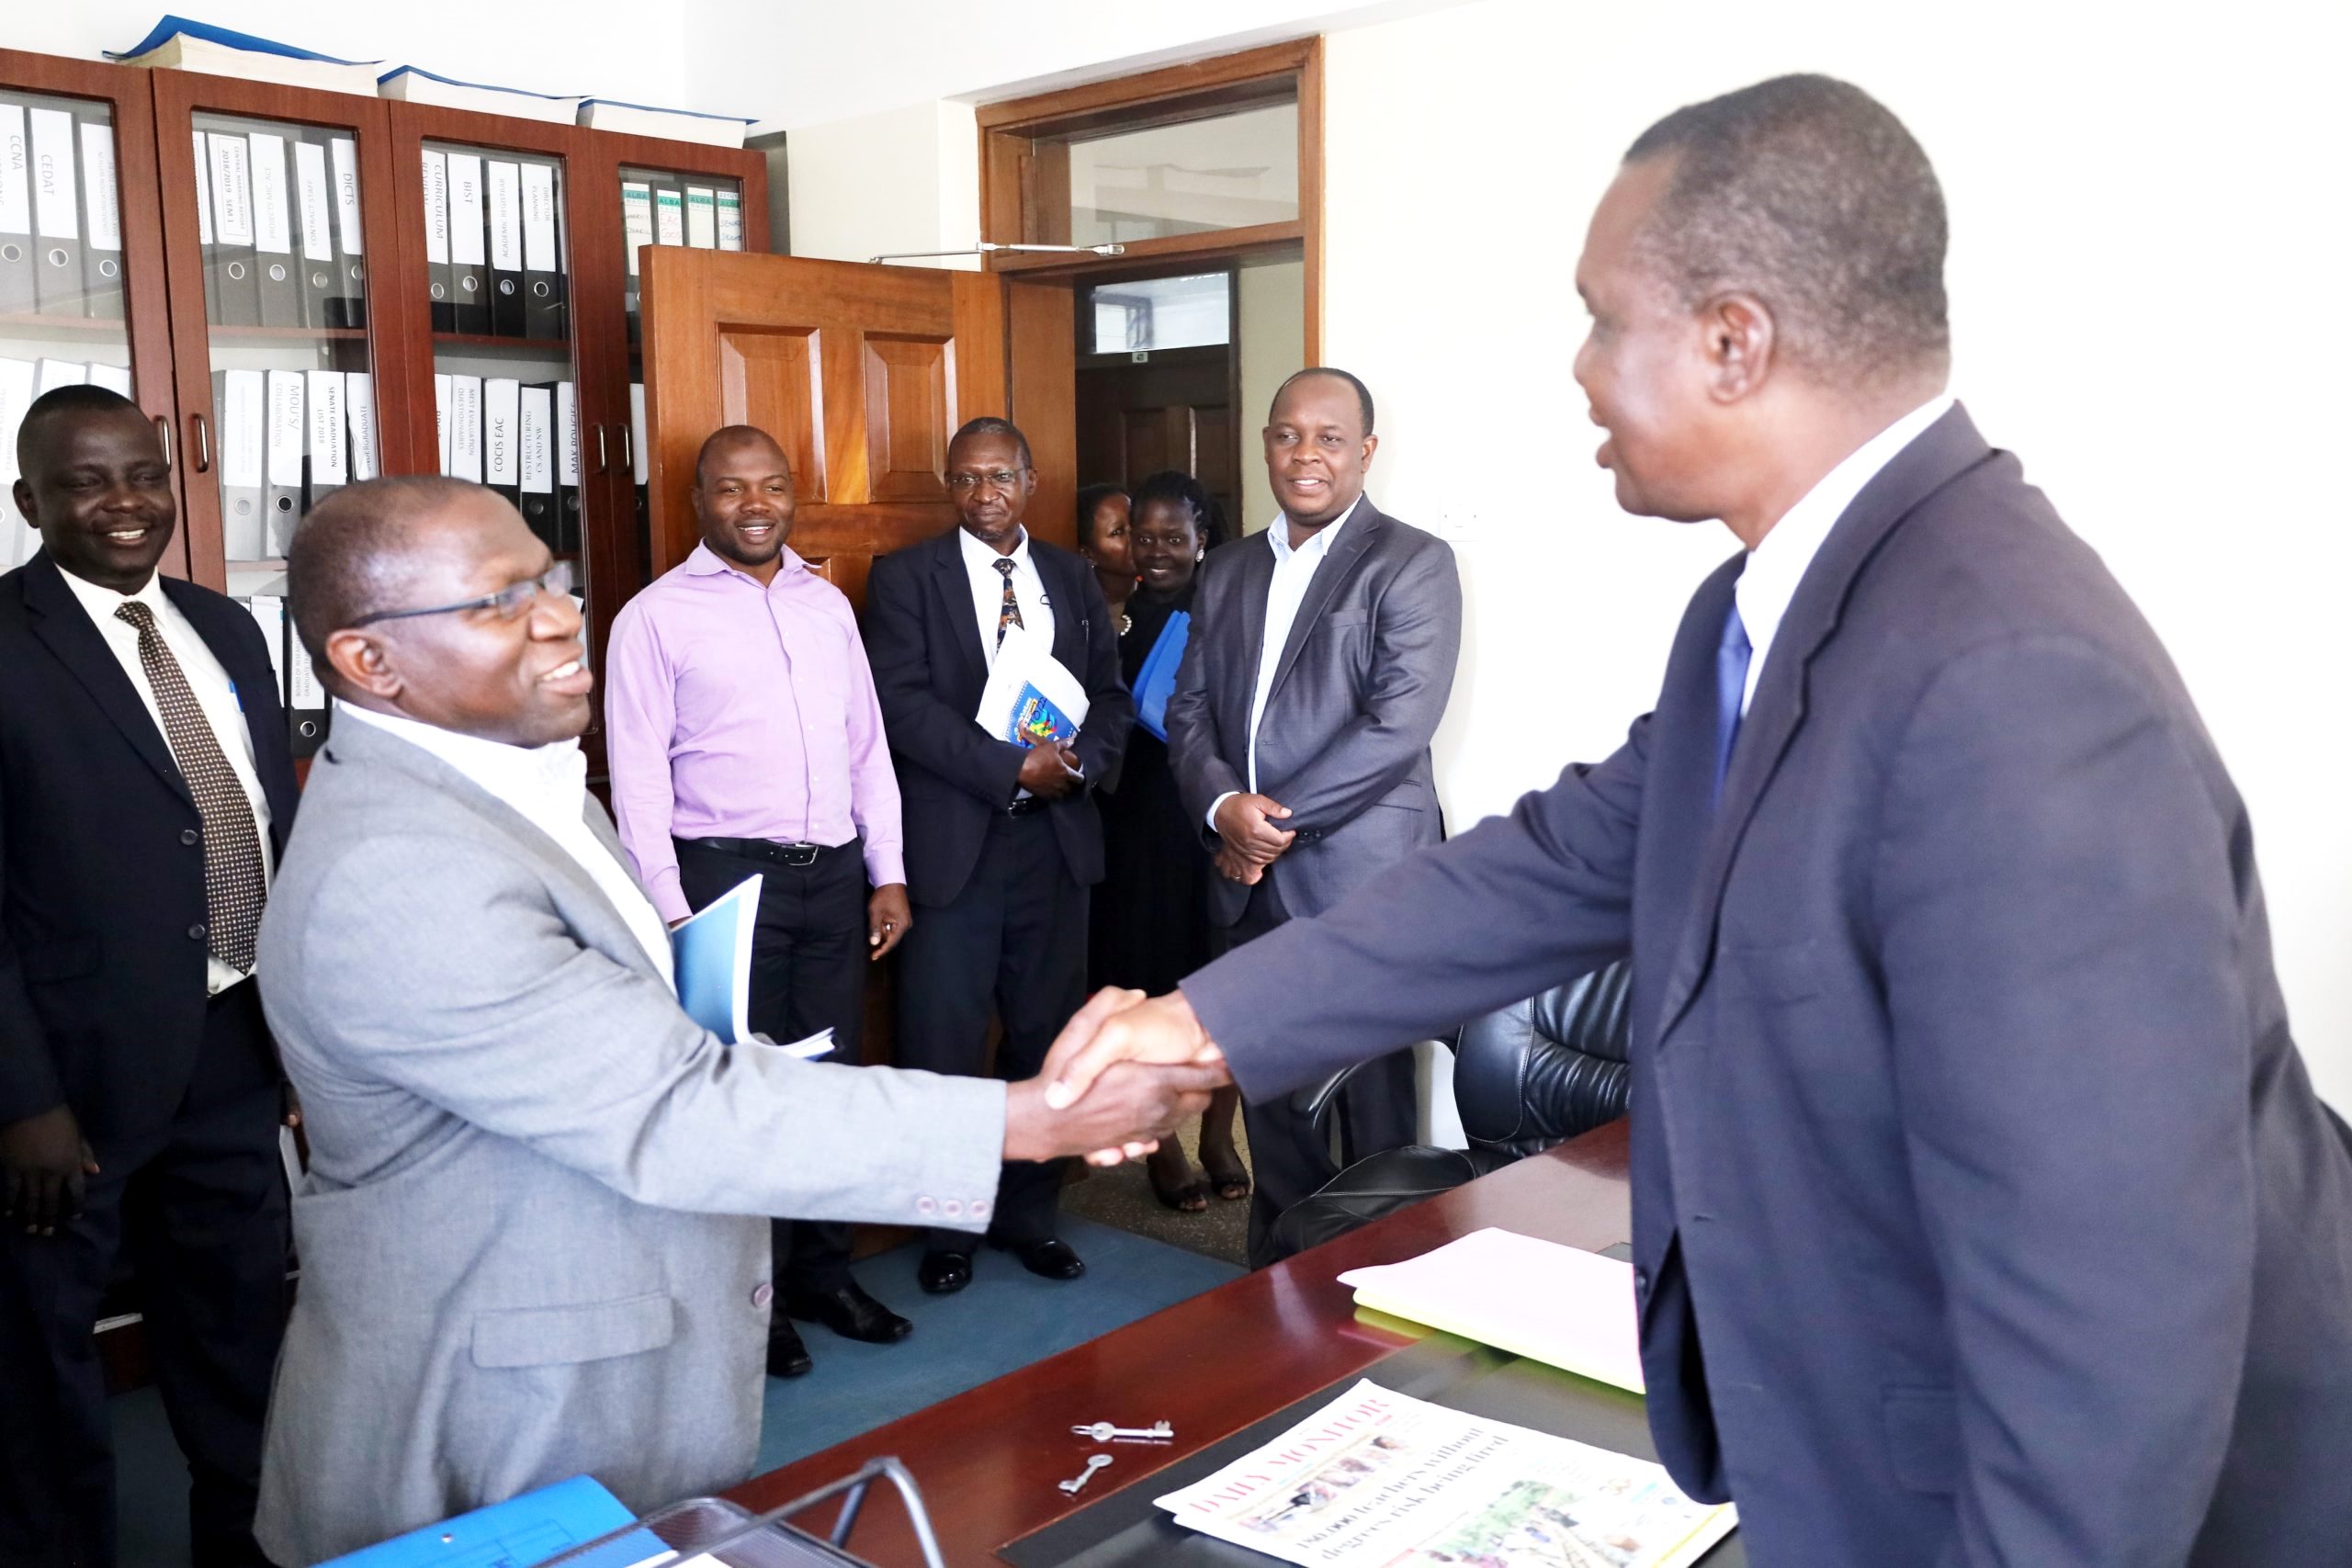 Assoc. Prof. Gilbert Mayiga (R) shakes hands with Dr. Joseph Balikuddembe during the handover ceremony of the SCIT Deanship on 30th November 2022 at CoCIS, Makerere University.